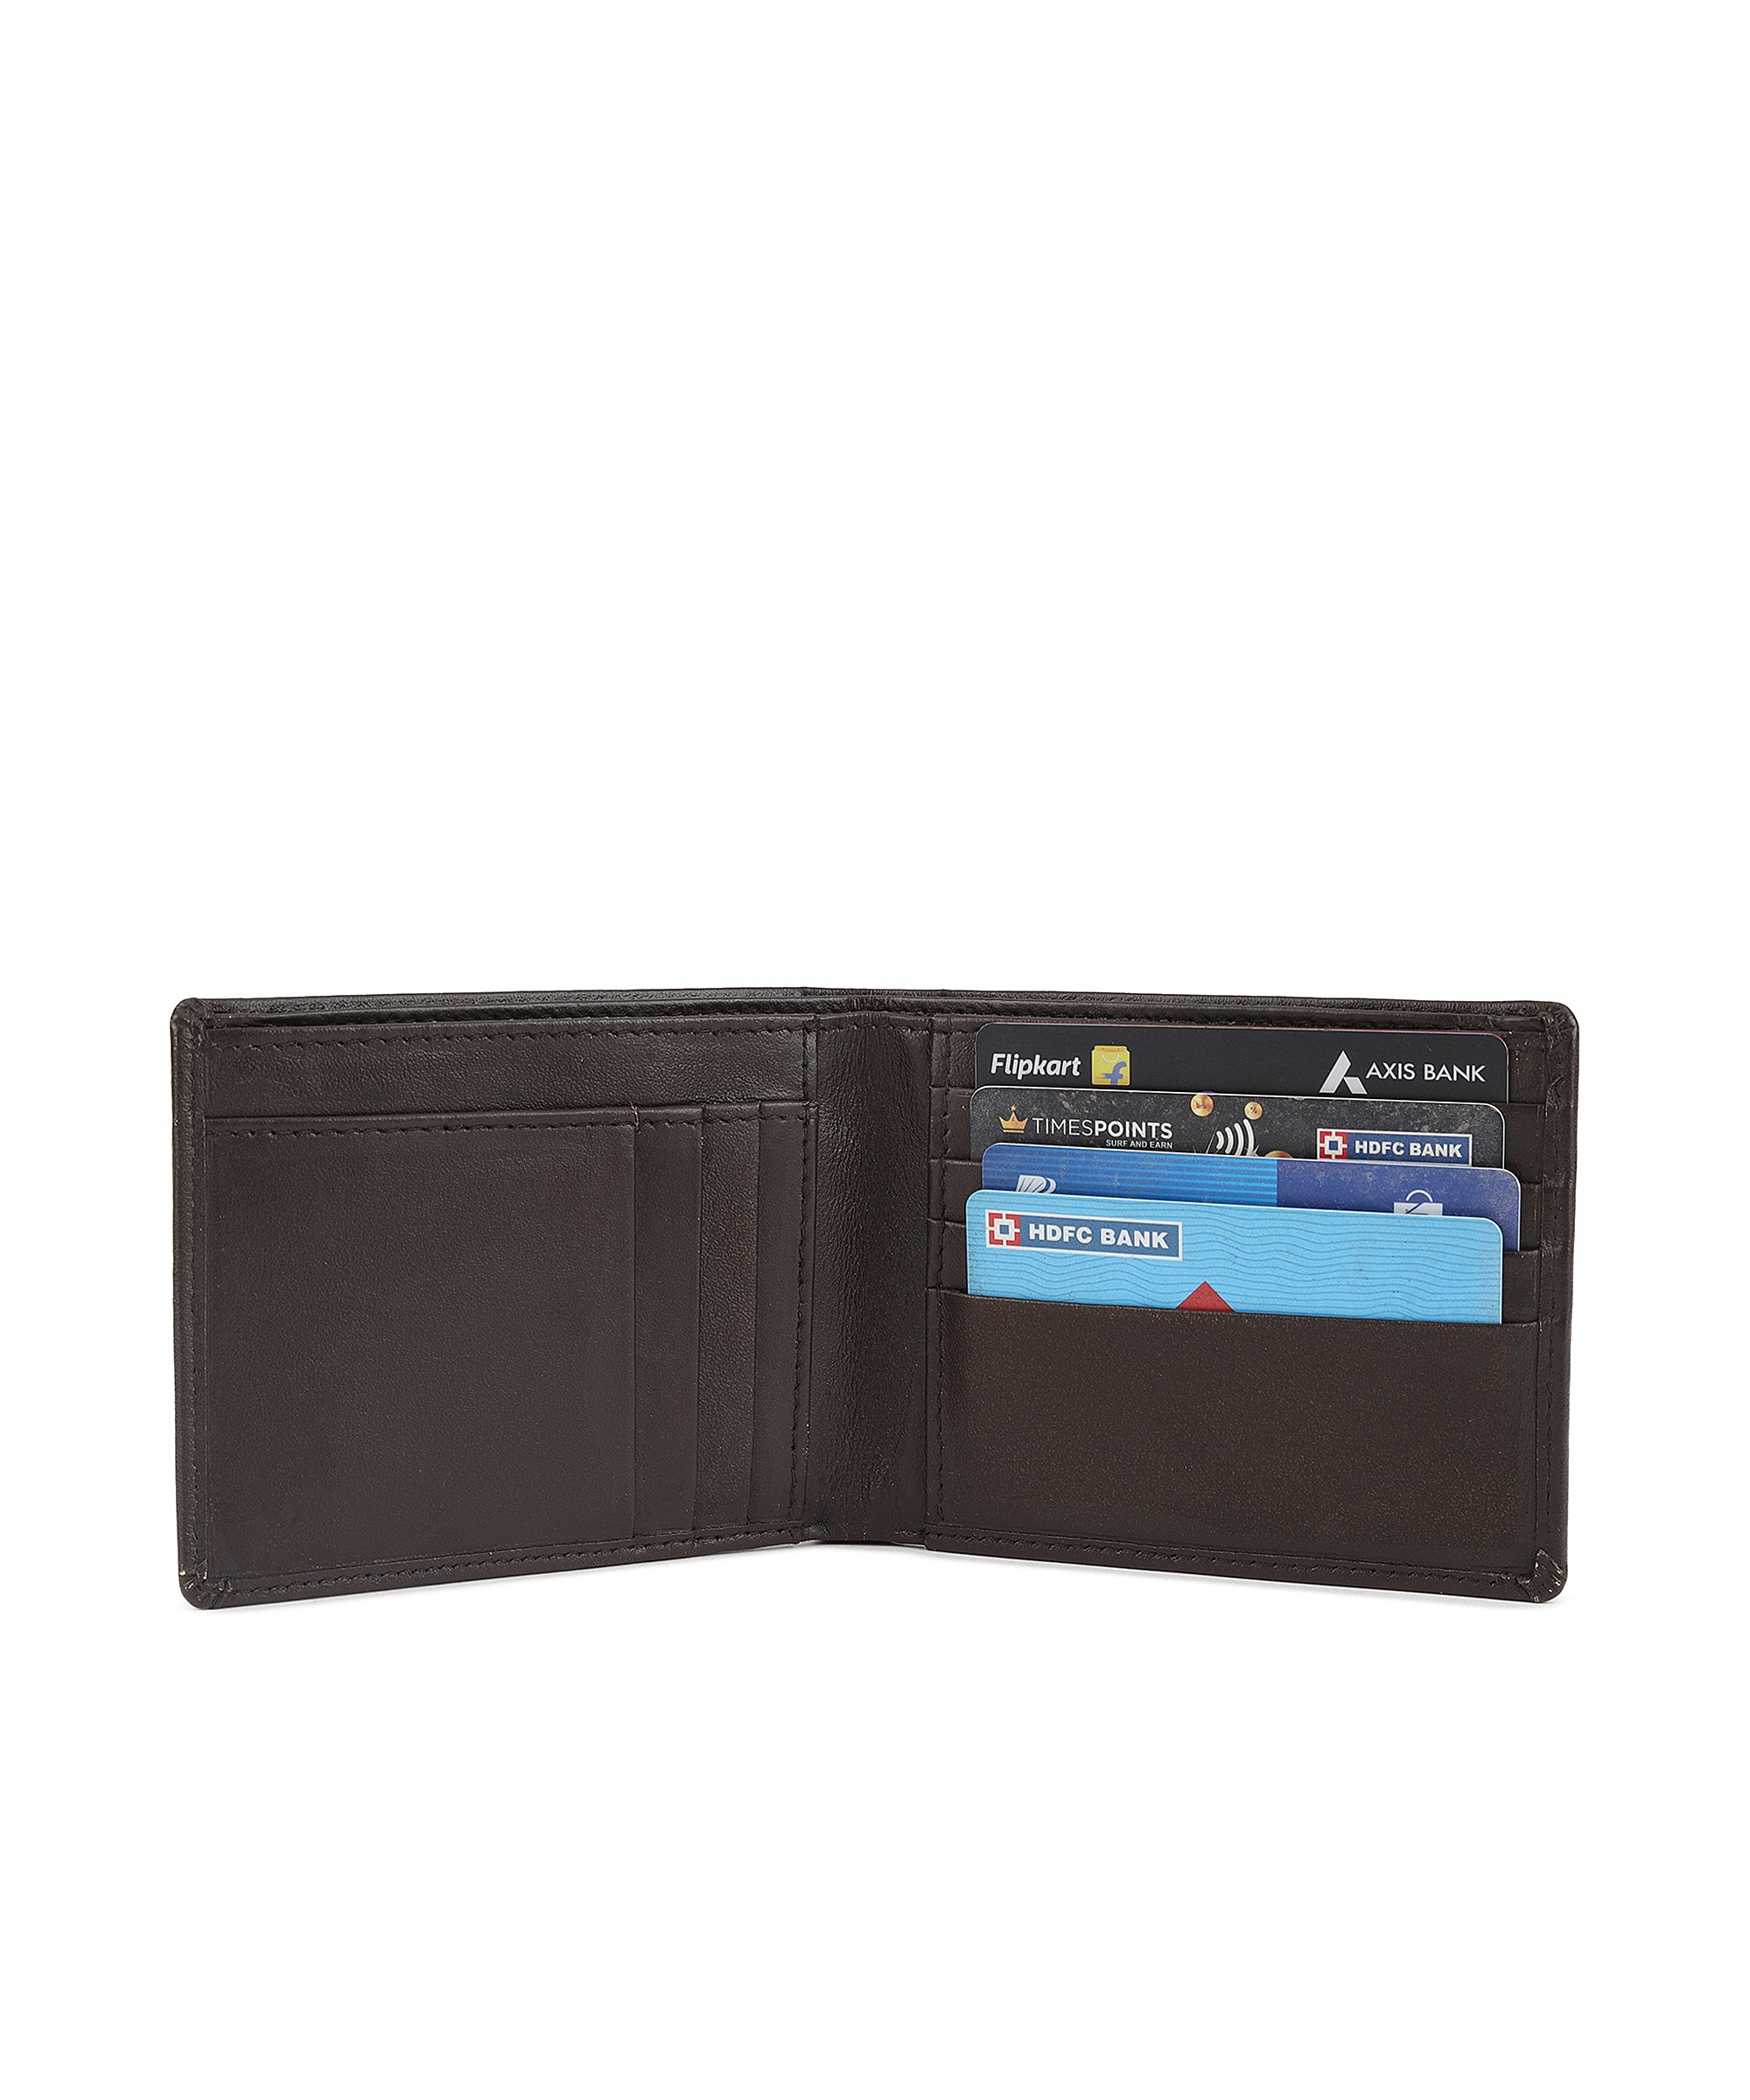 Urbano Fashion Men's Casual, Formal Brown Genuine Leather Wallet-8 Card Slots